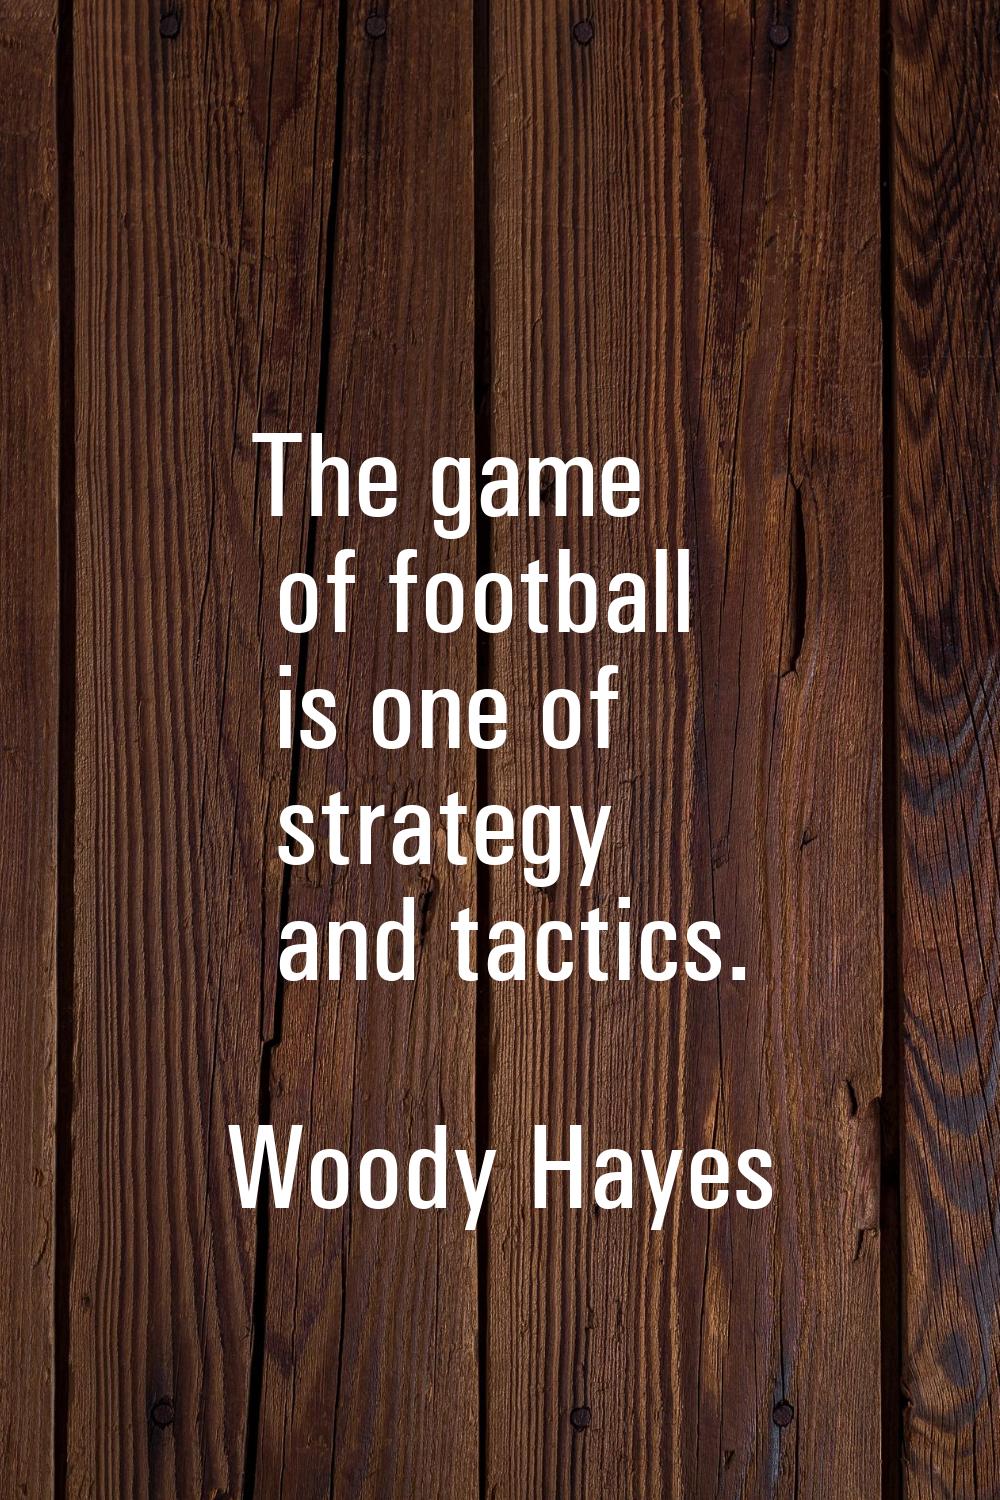 The game of football is one of strategy and tactics.